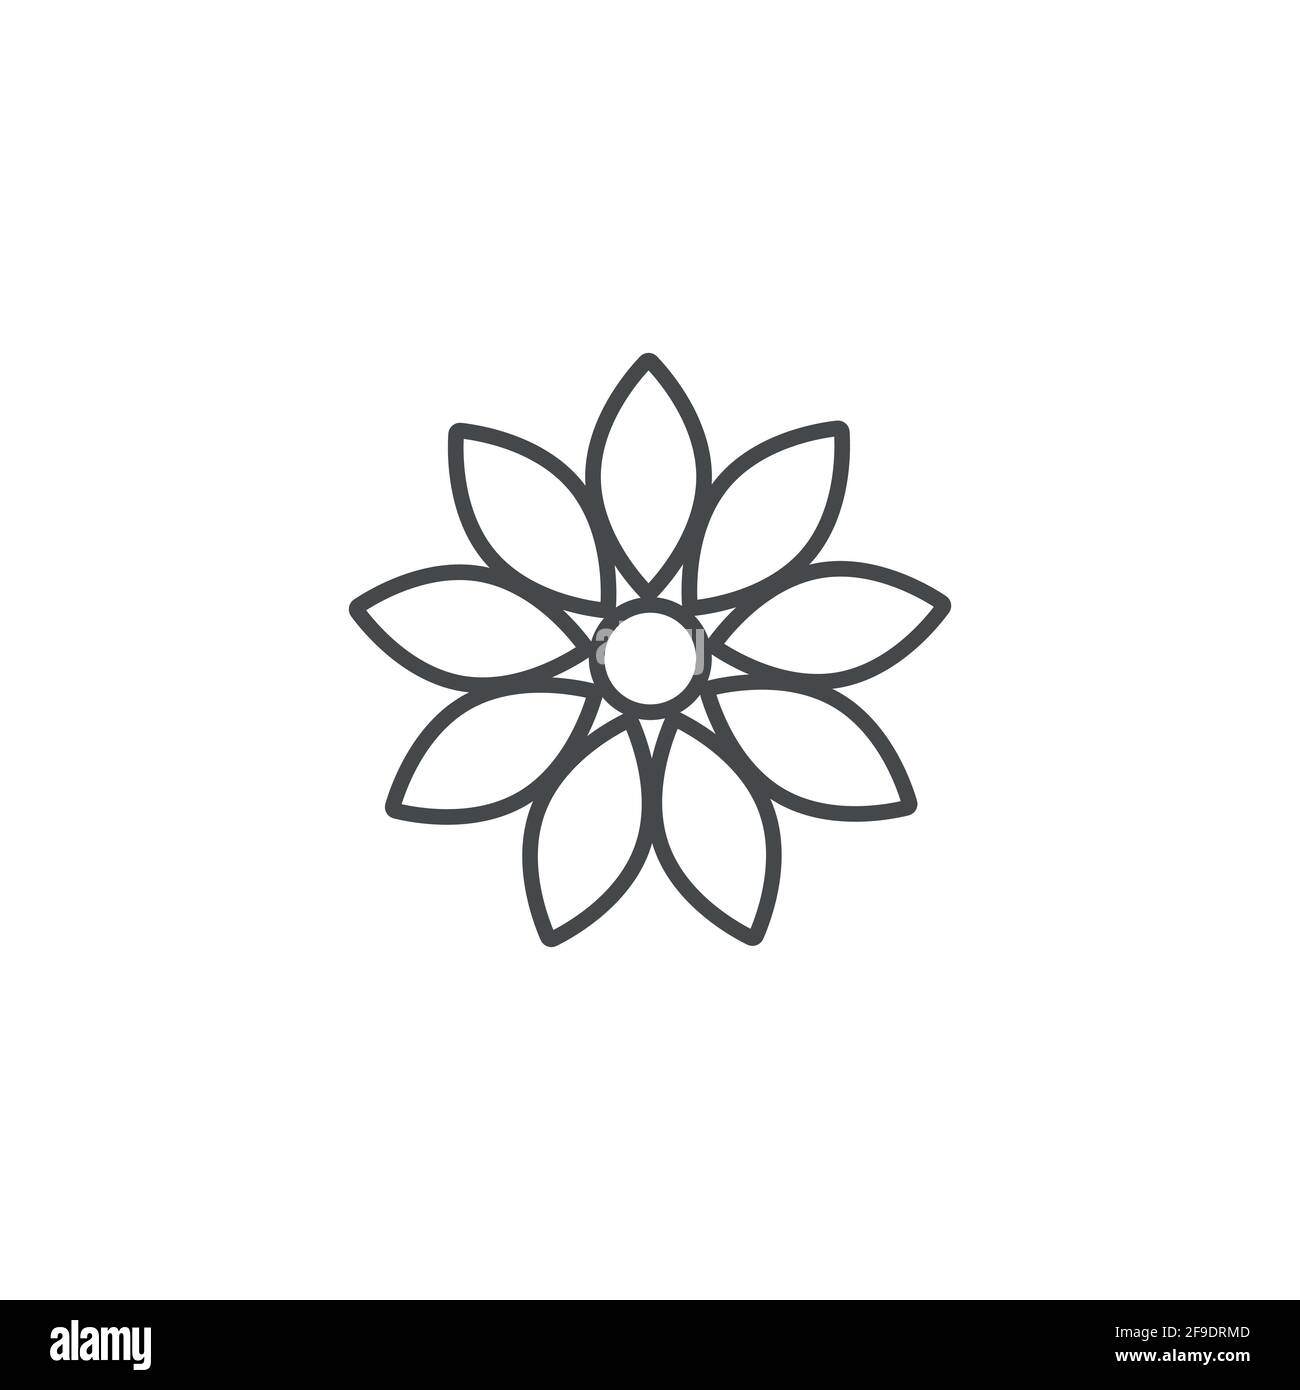 Black flat icon of sunflower. Bloom with big sharp petals and round core. Isolated on white. Vector illustration. Eco style. Nature flower symbol. Stock Vector